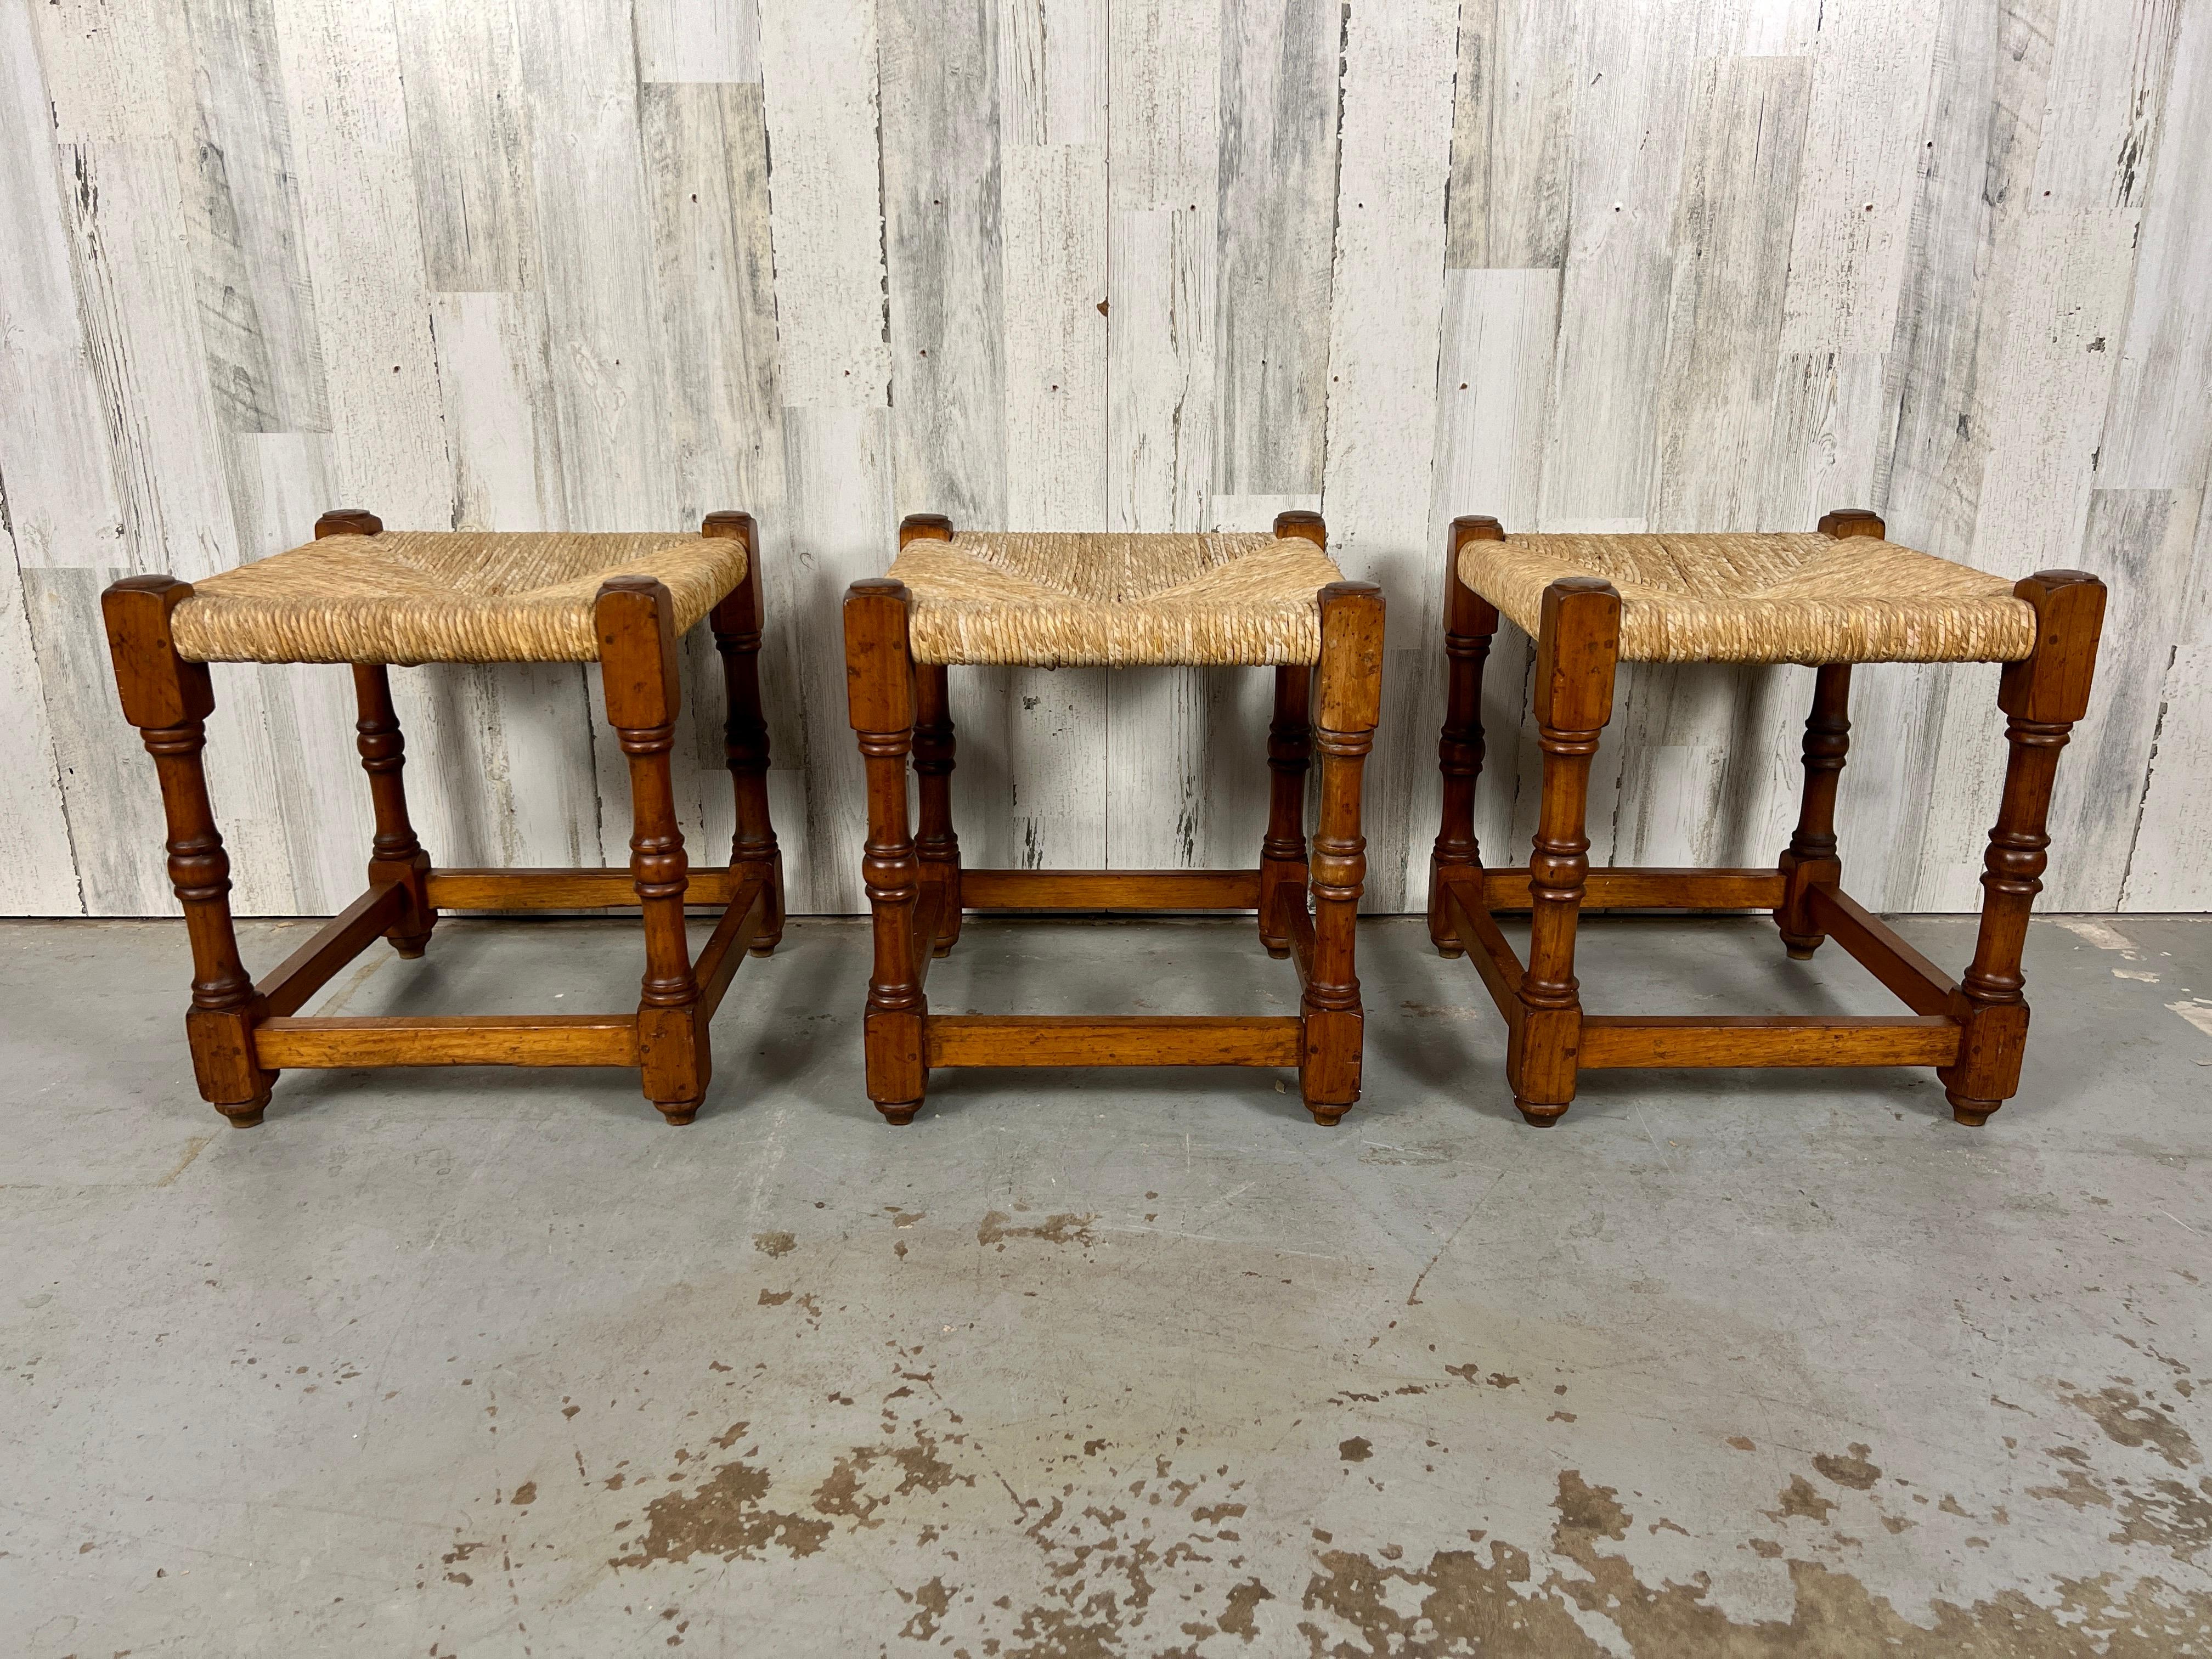 Rustic country French stools with woven grass rush seats,